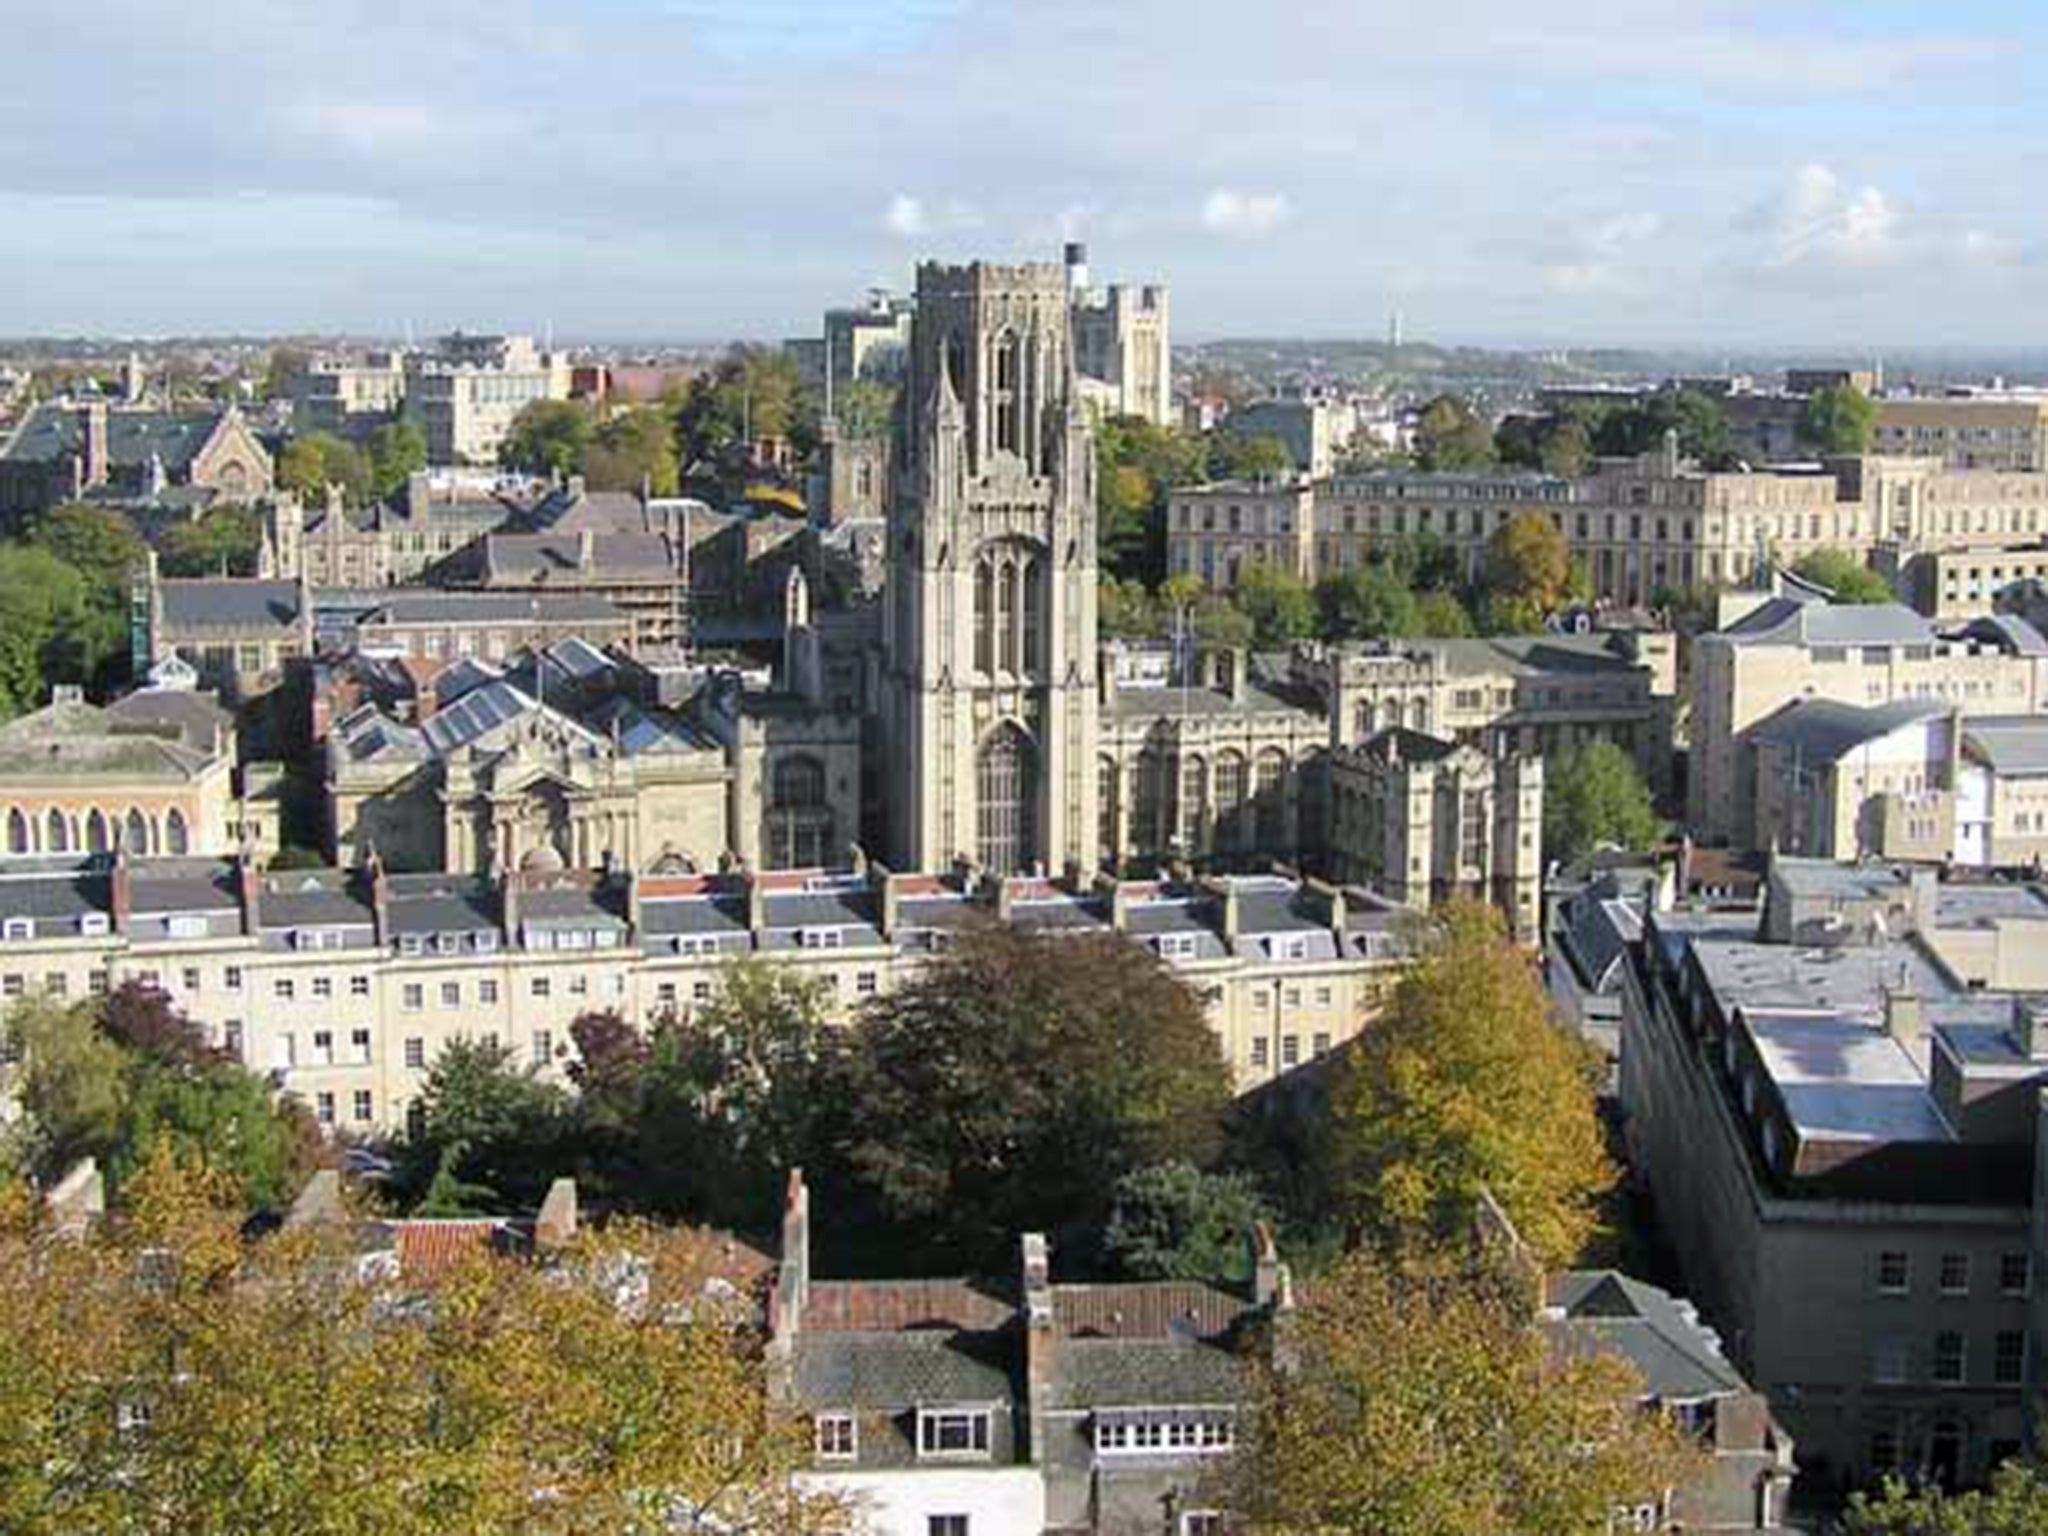 The University of Bristol, pictured